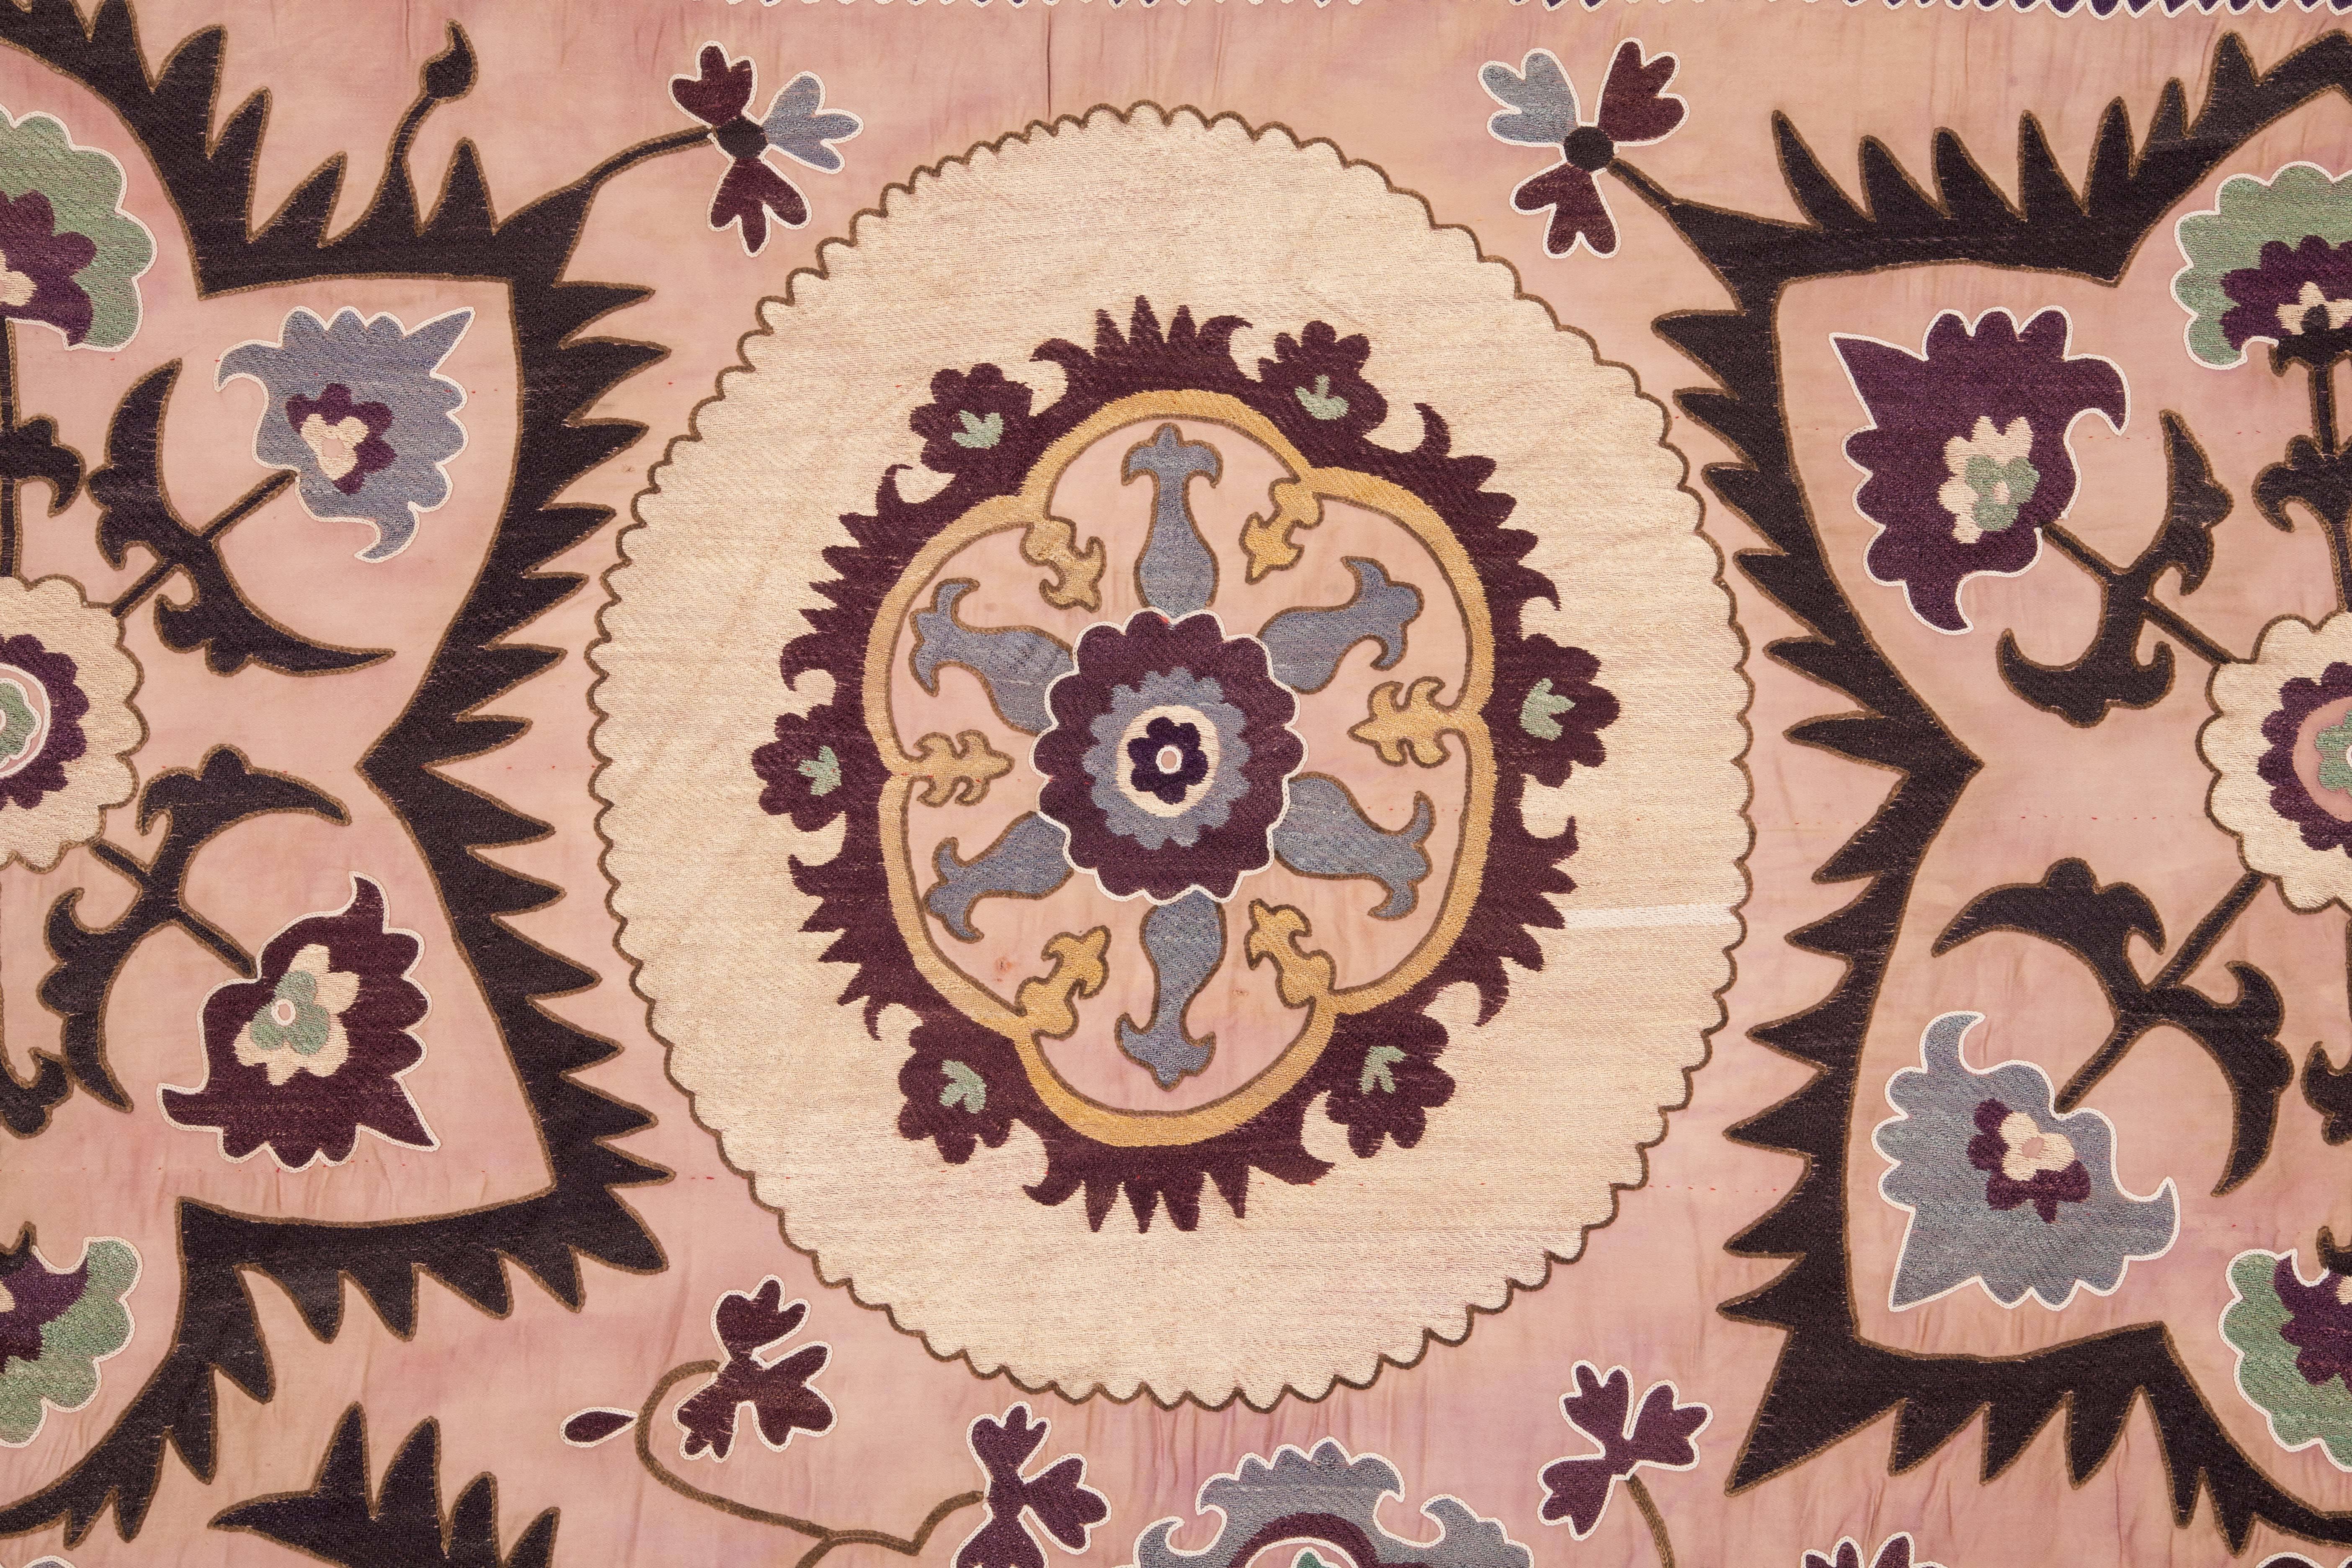 Embroidered First Half of the 20th Century, Uzbek Suzani, Silk Embroidery on a Cotton Ground